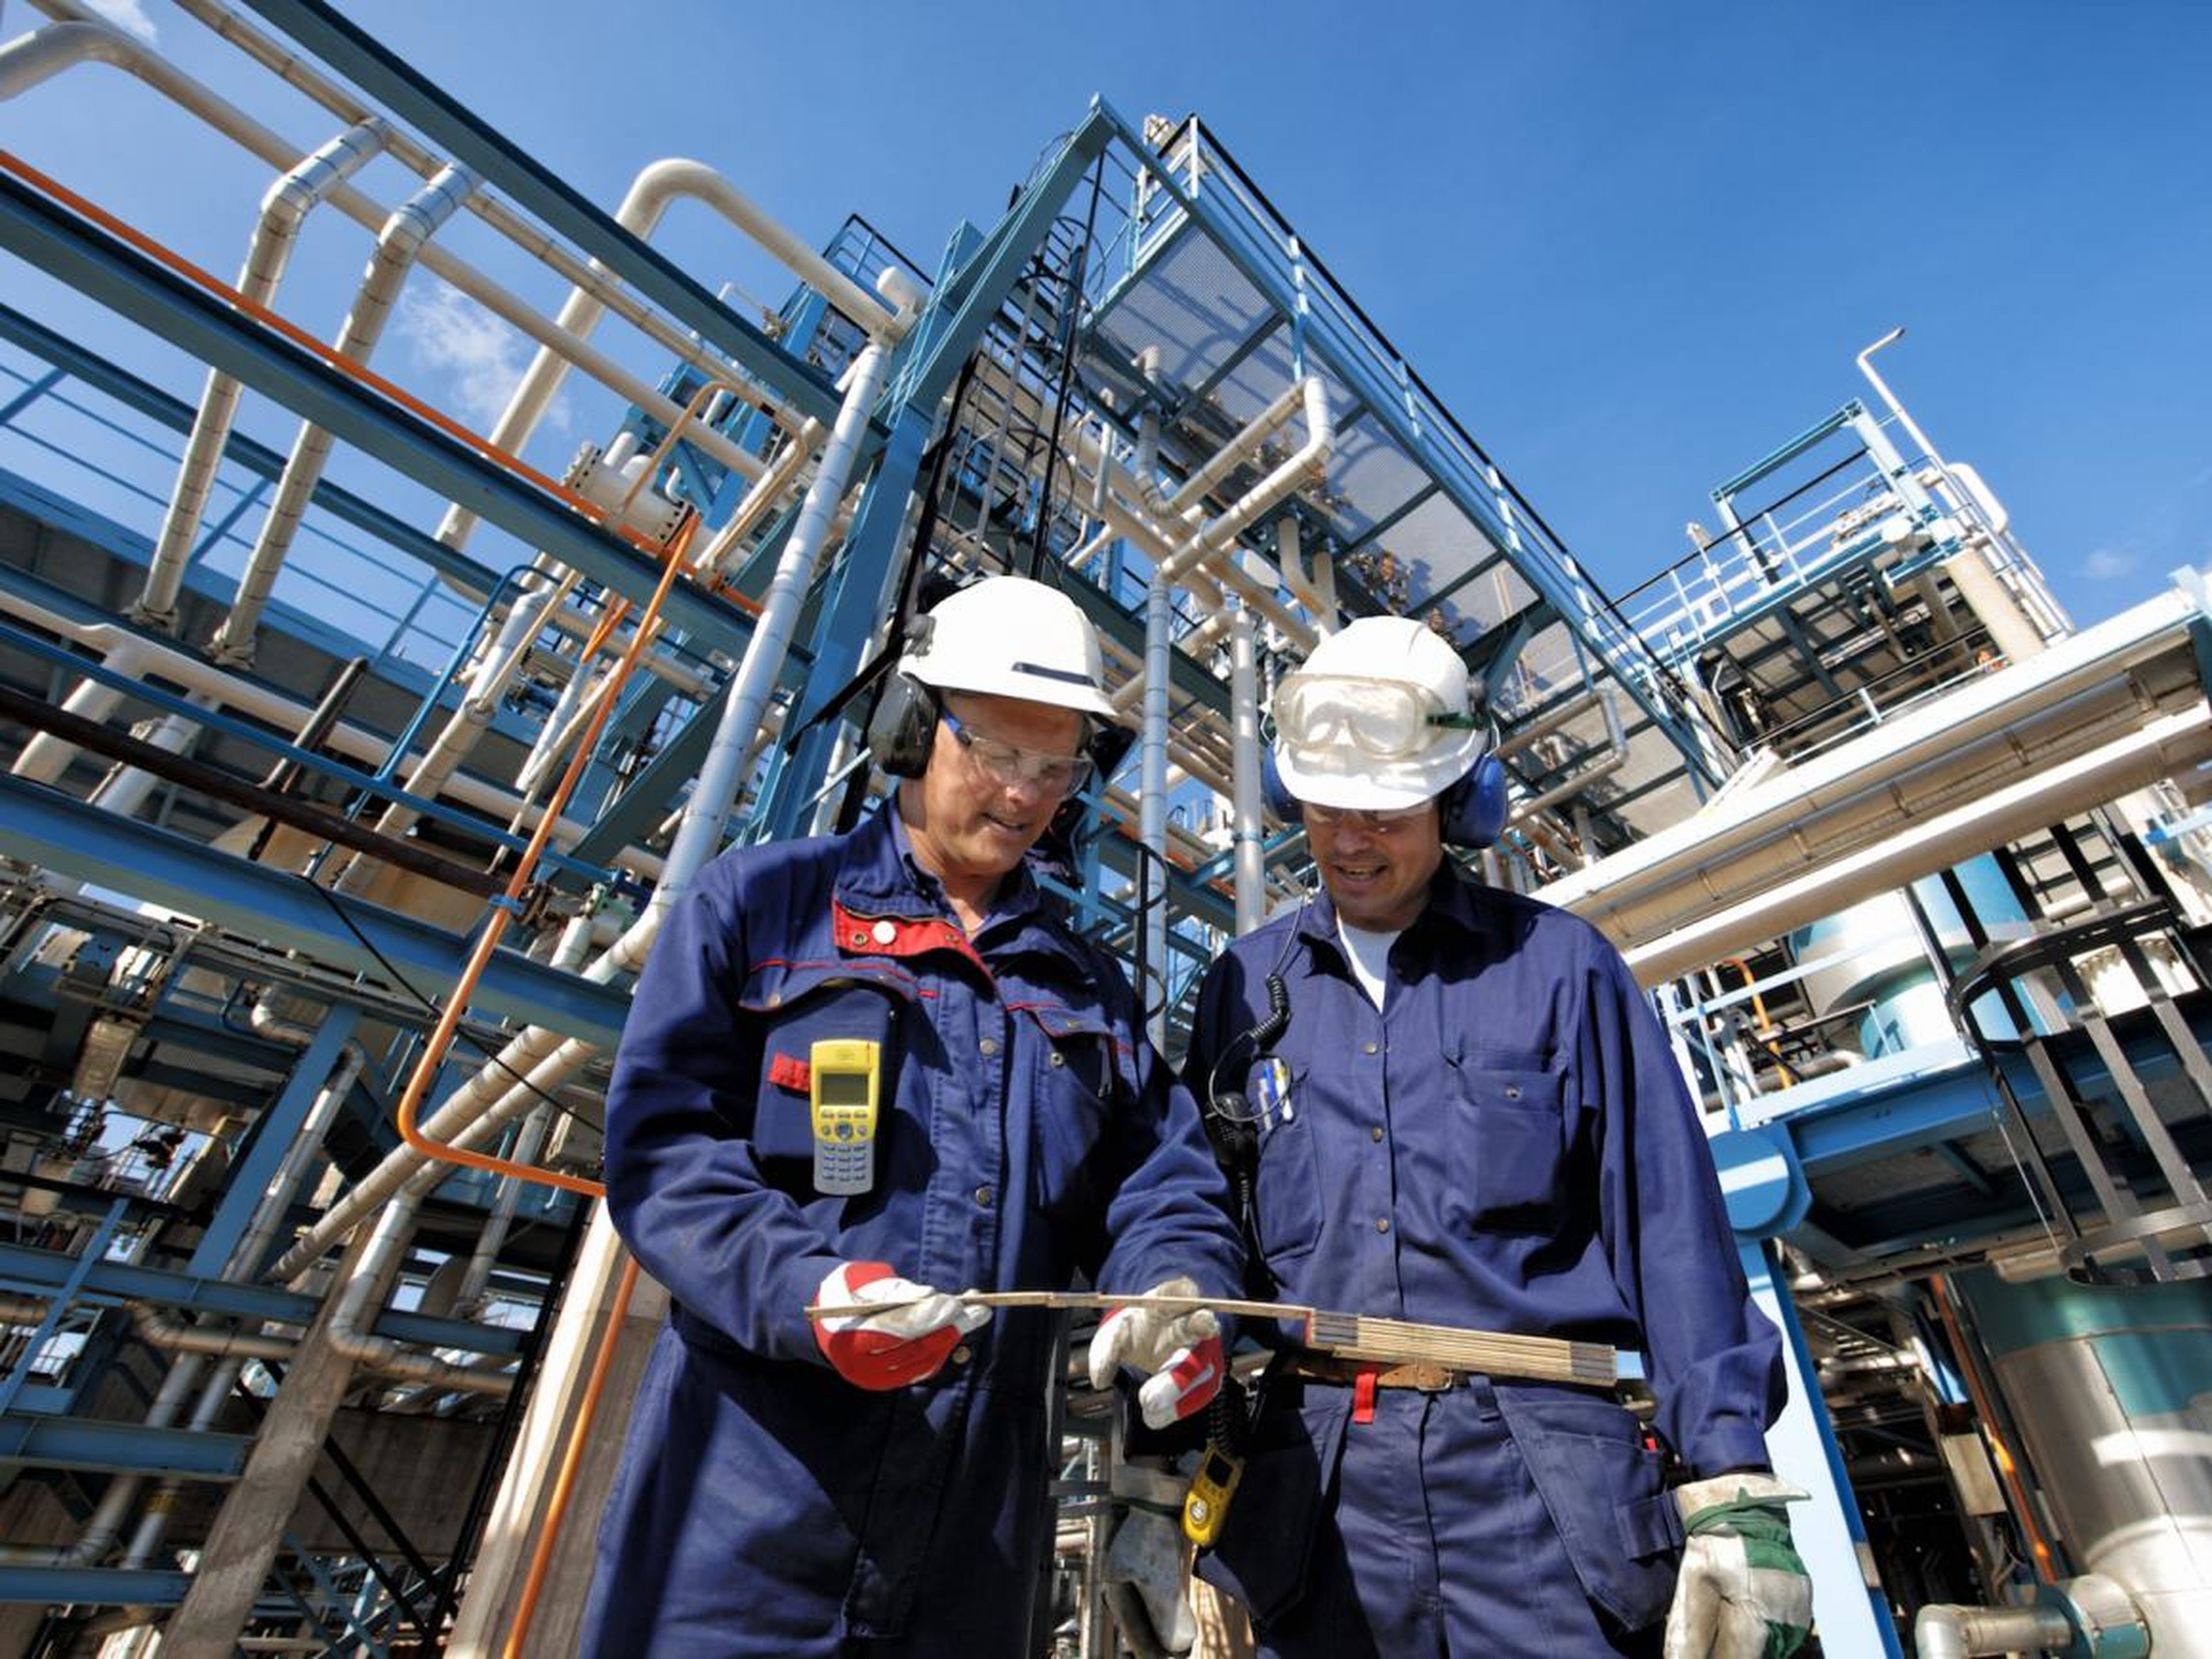 Petroleum engineering majors have a mid-career salary of $183,600 a year